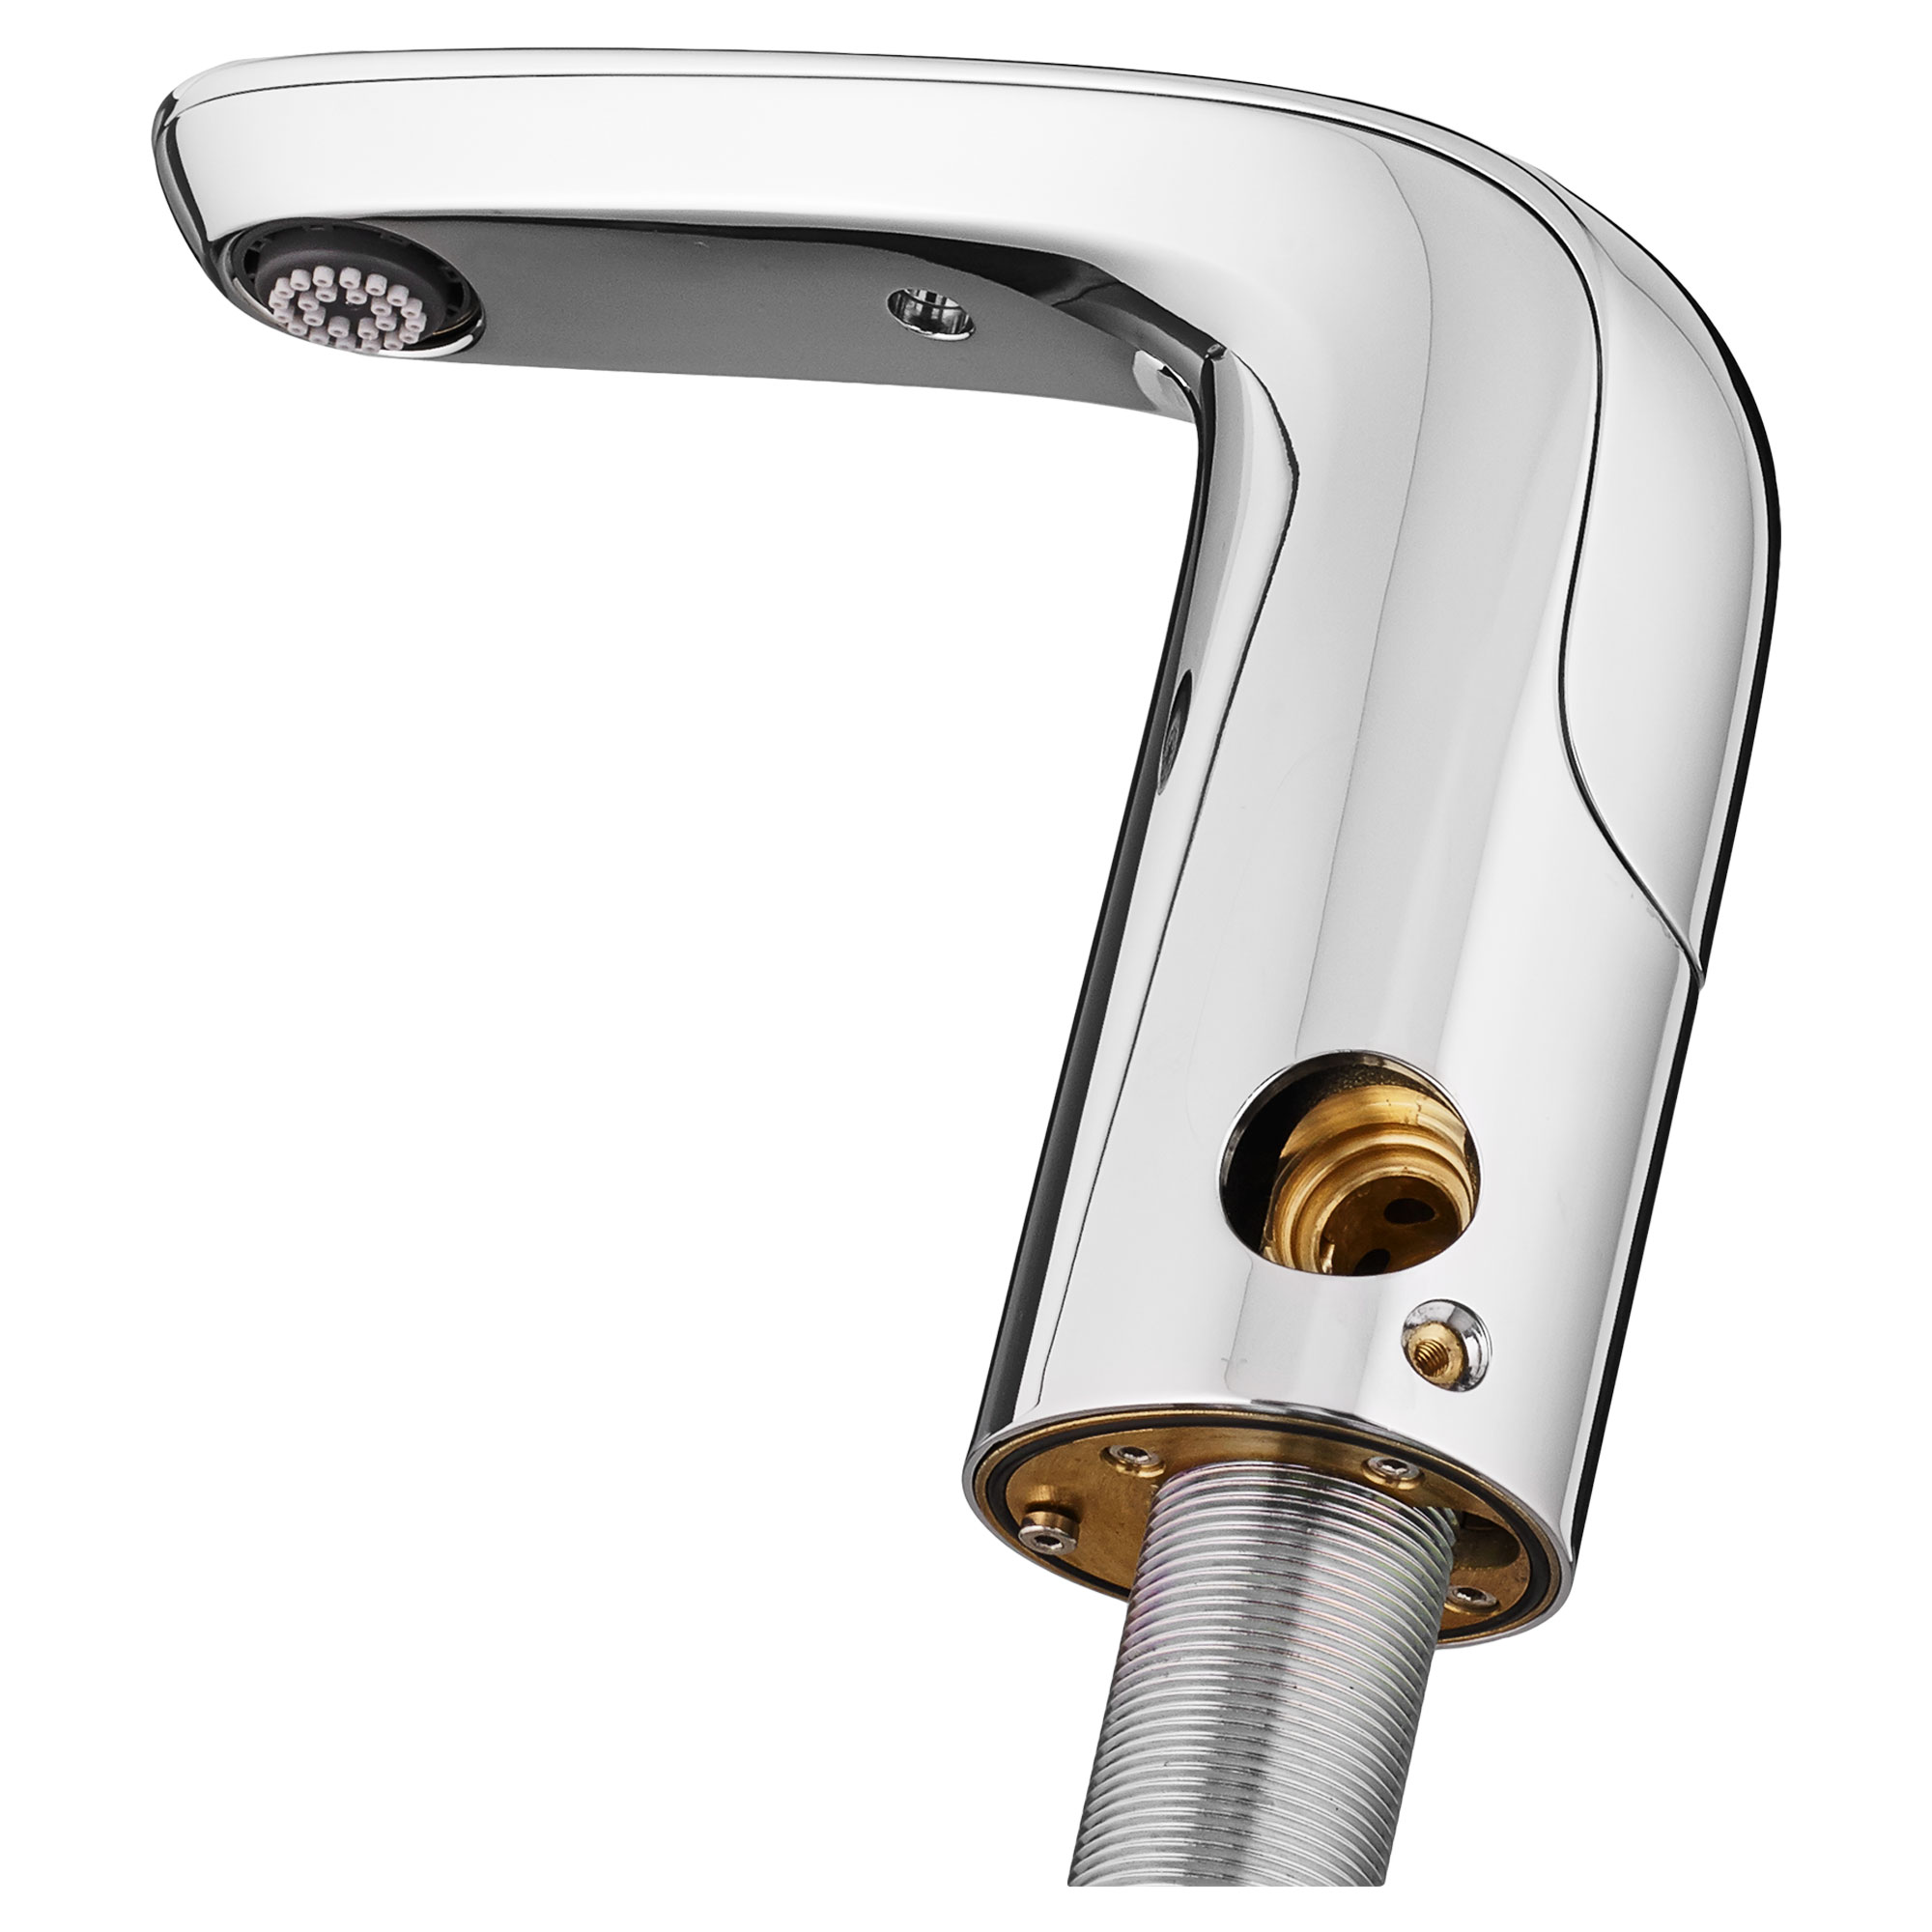 NextGen Selectronic® Touchless Faucet, Battery-Powered With Above-Deck Mixing, 0.5 gpm/1.9 Lpm